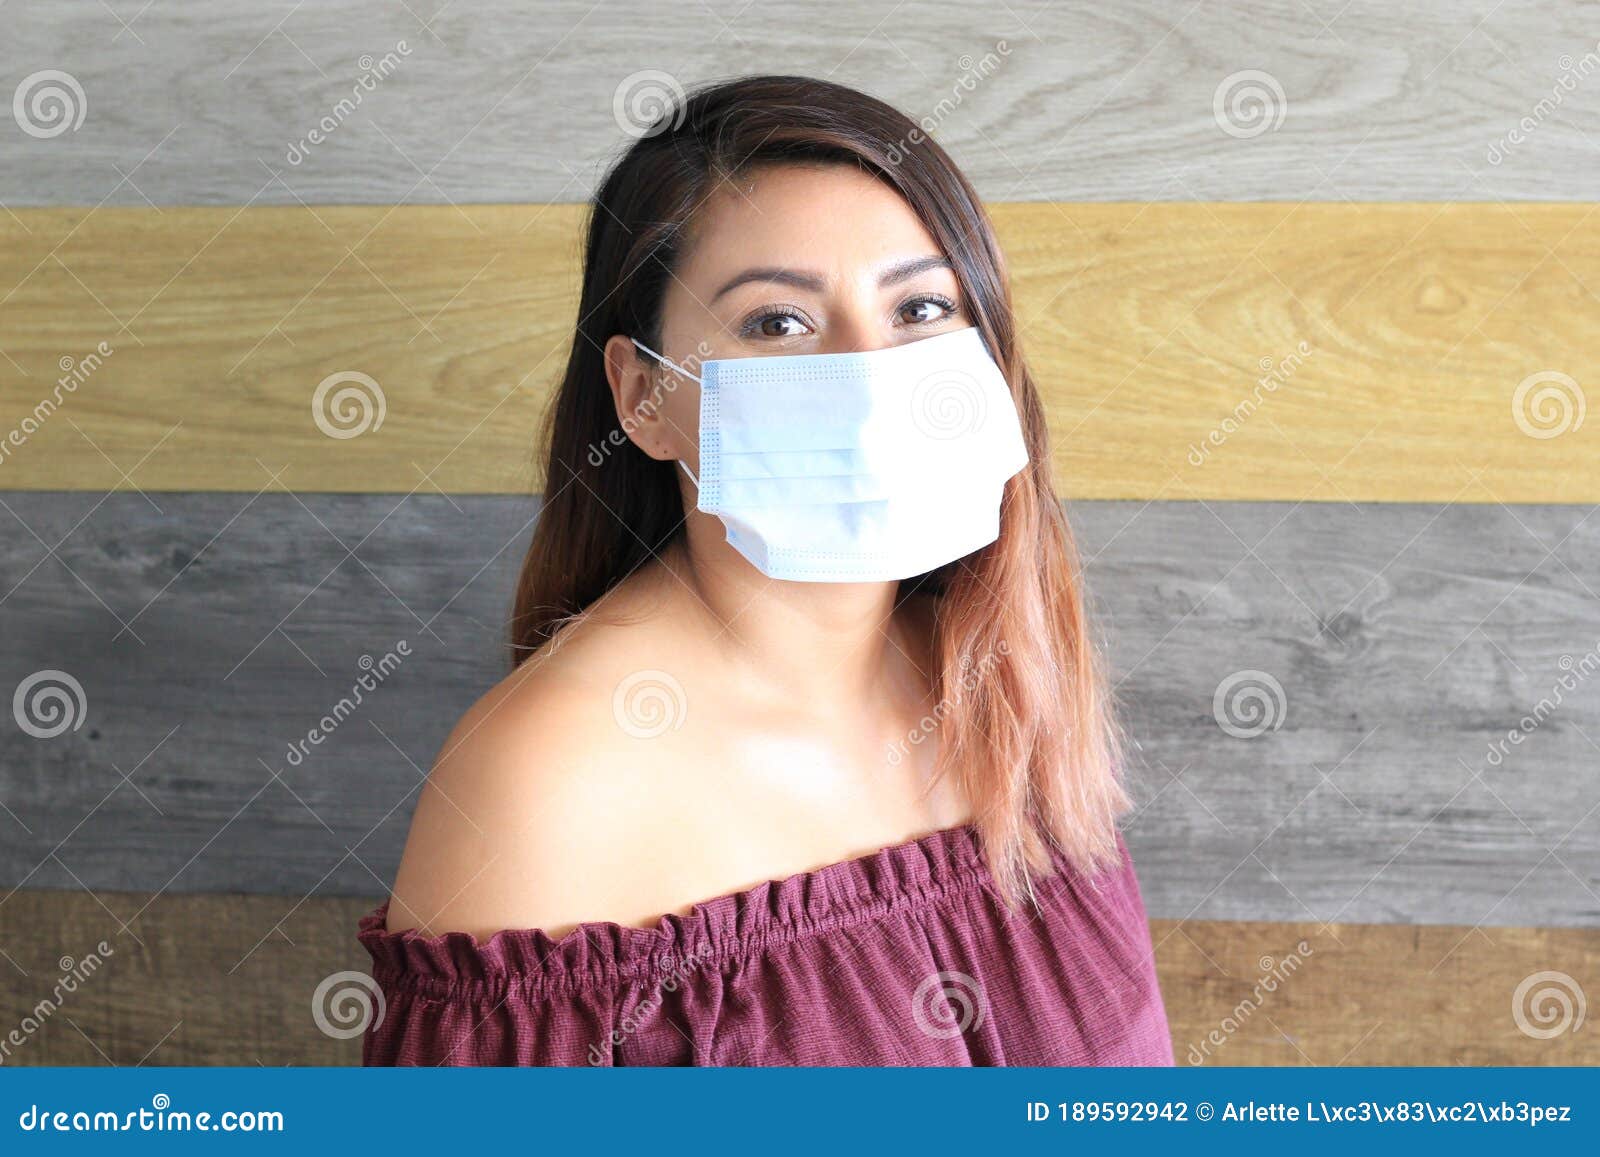 young latin woman with multilayer face masks for clinical use to prevent covid